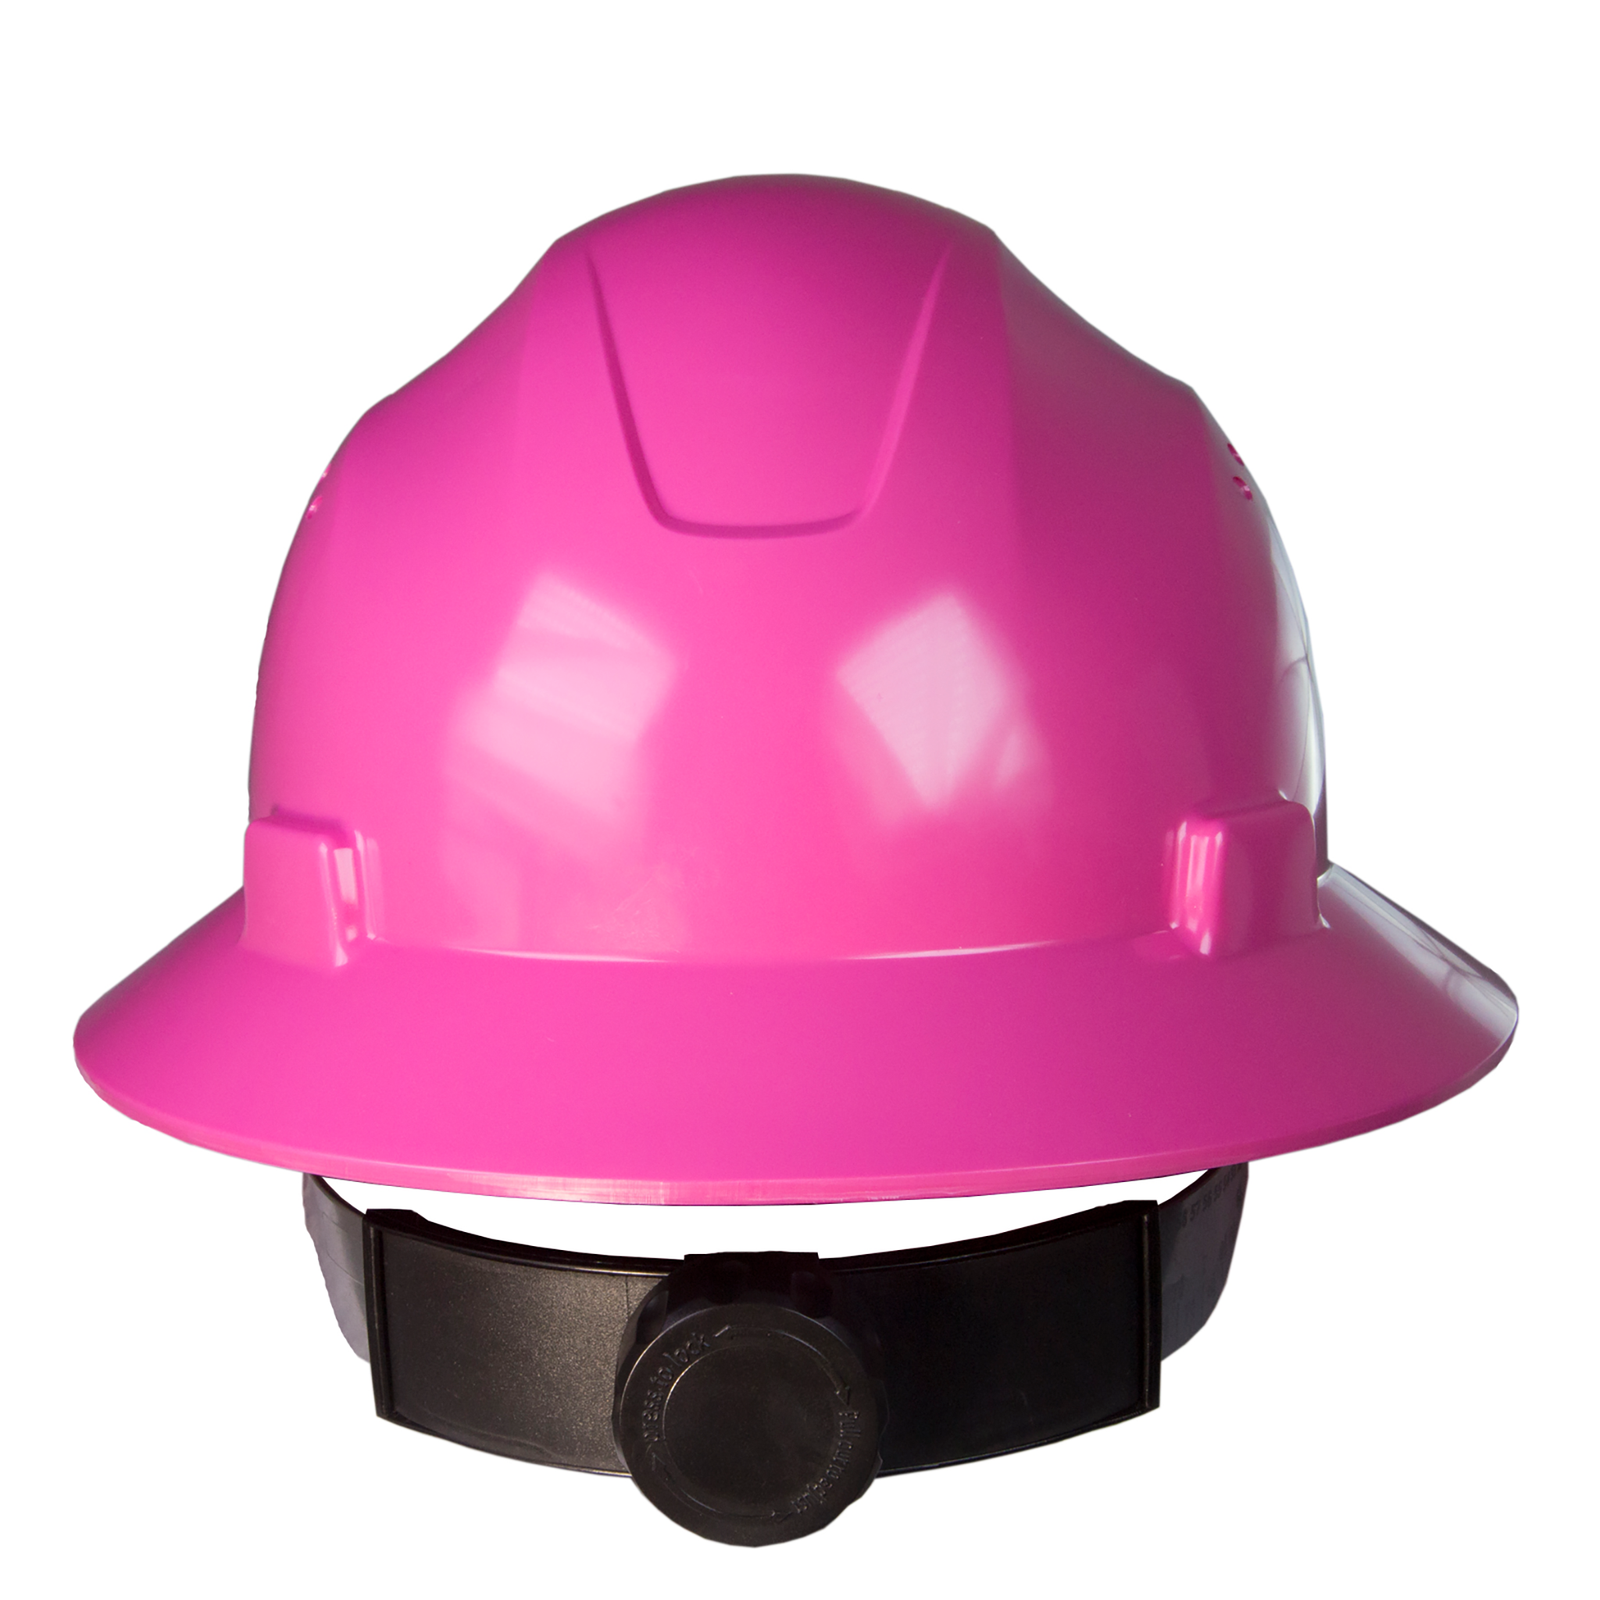 Full Brim Safety Hard Hat with 4 Point Suspension - PinkFit Collection